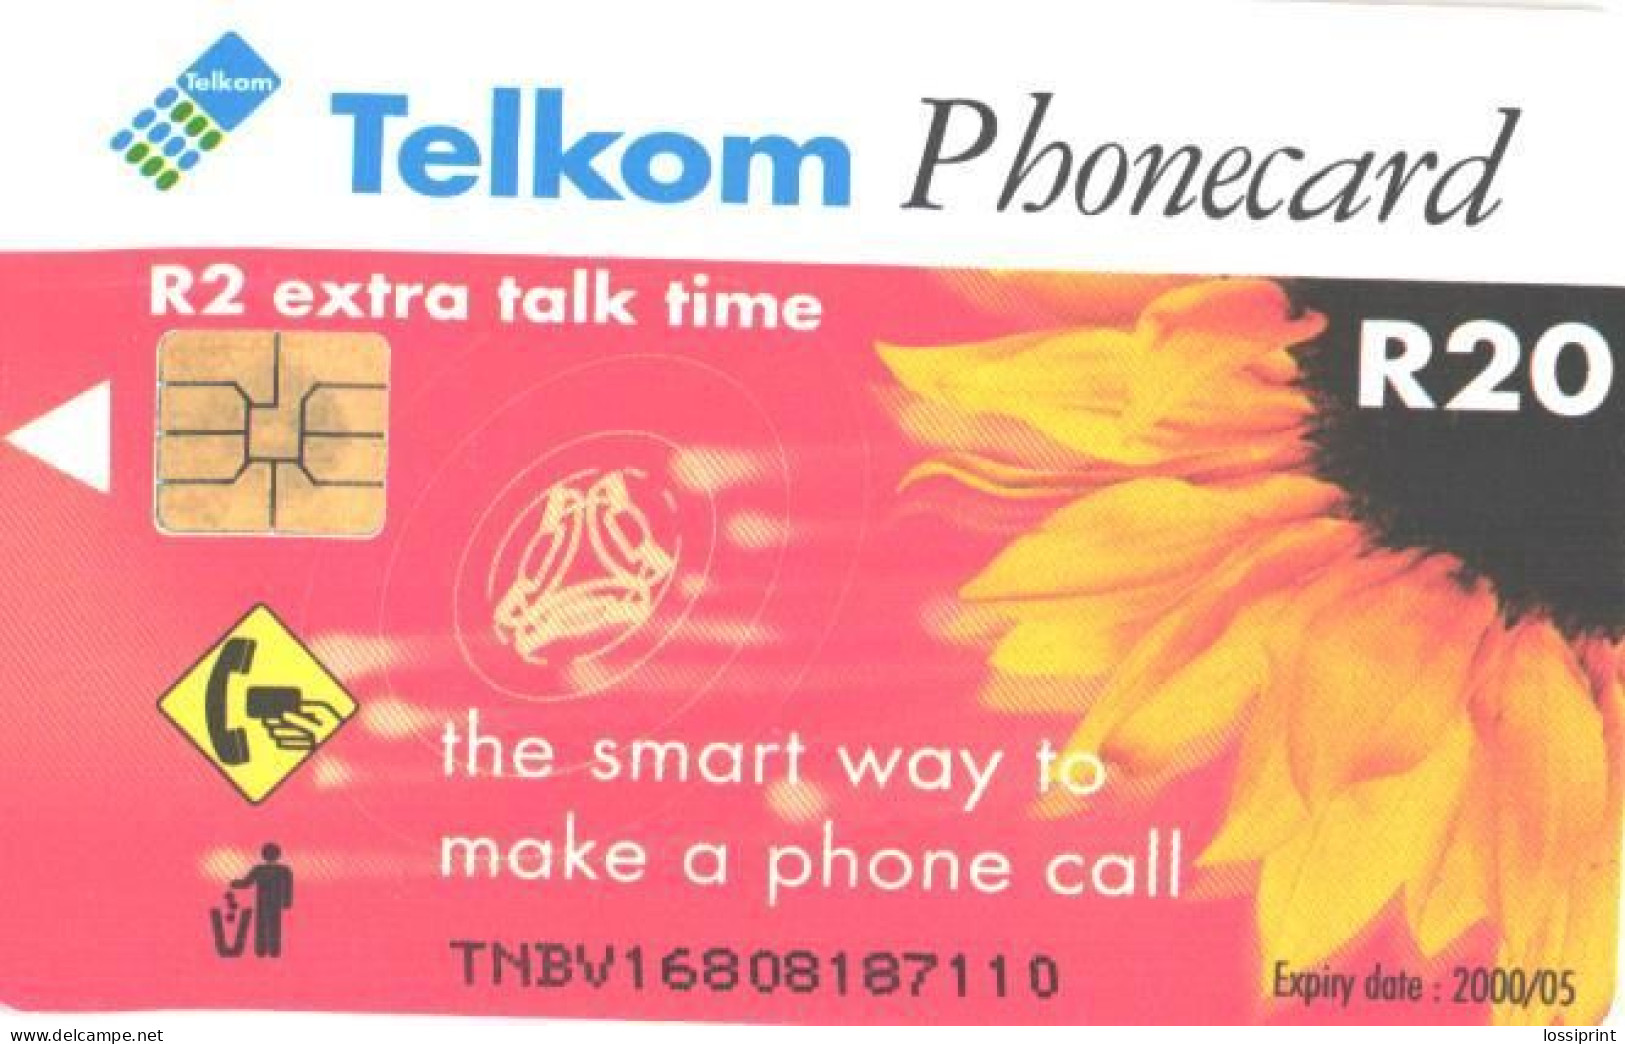 South Africa:Used Phonecard, Telkom, R 20, Puzzle Card, 2000 - Puzzle